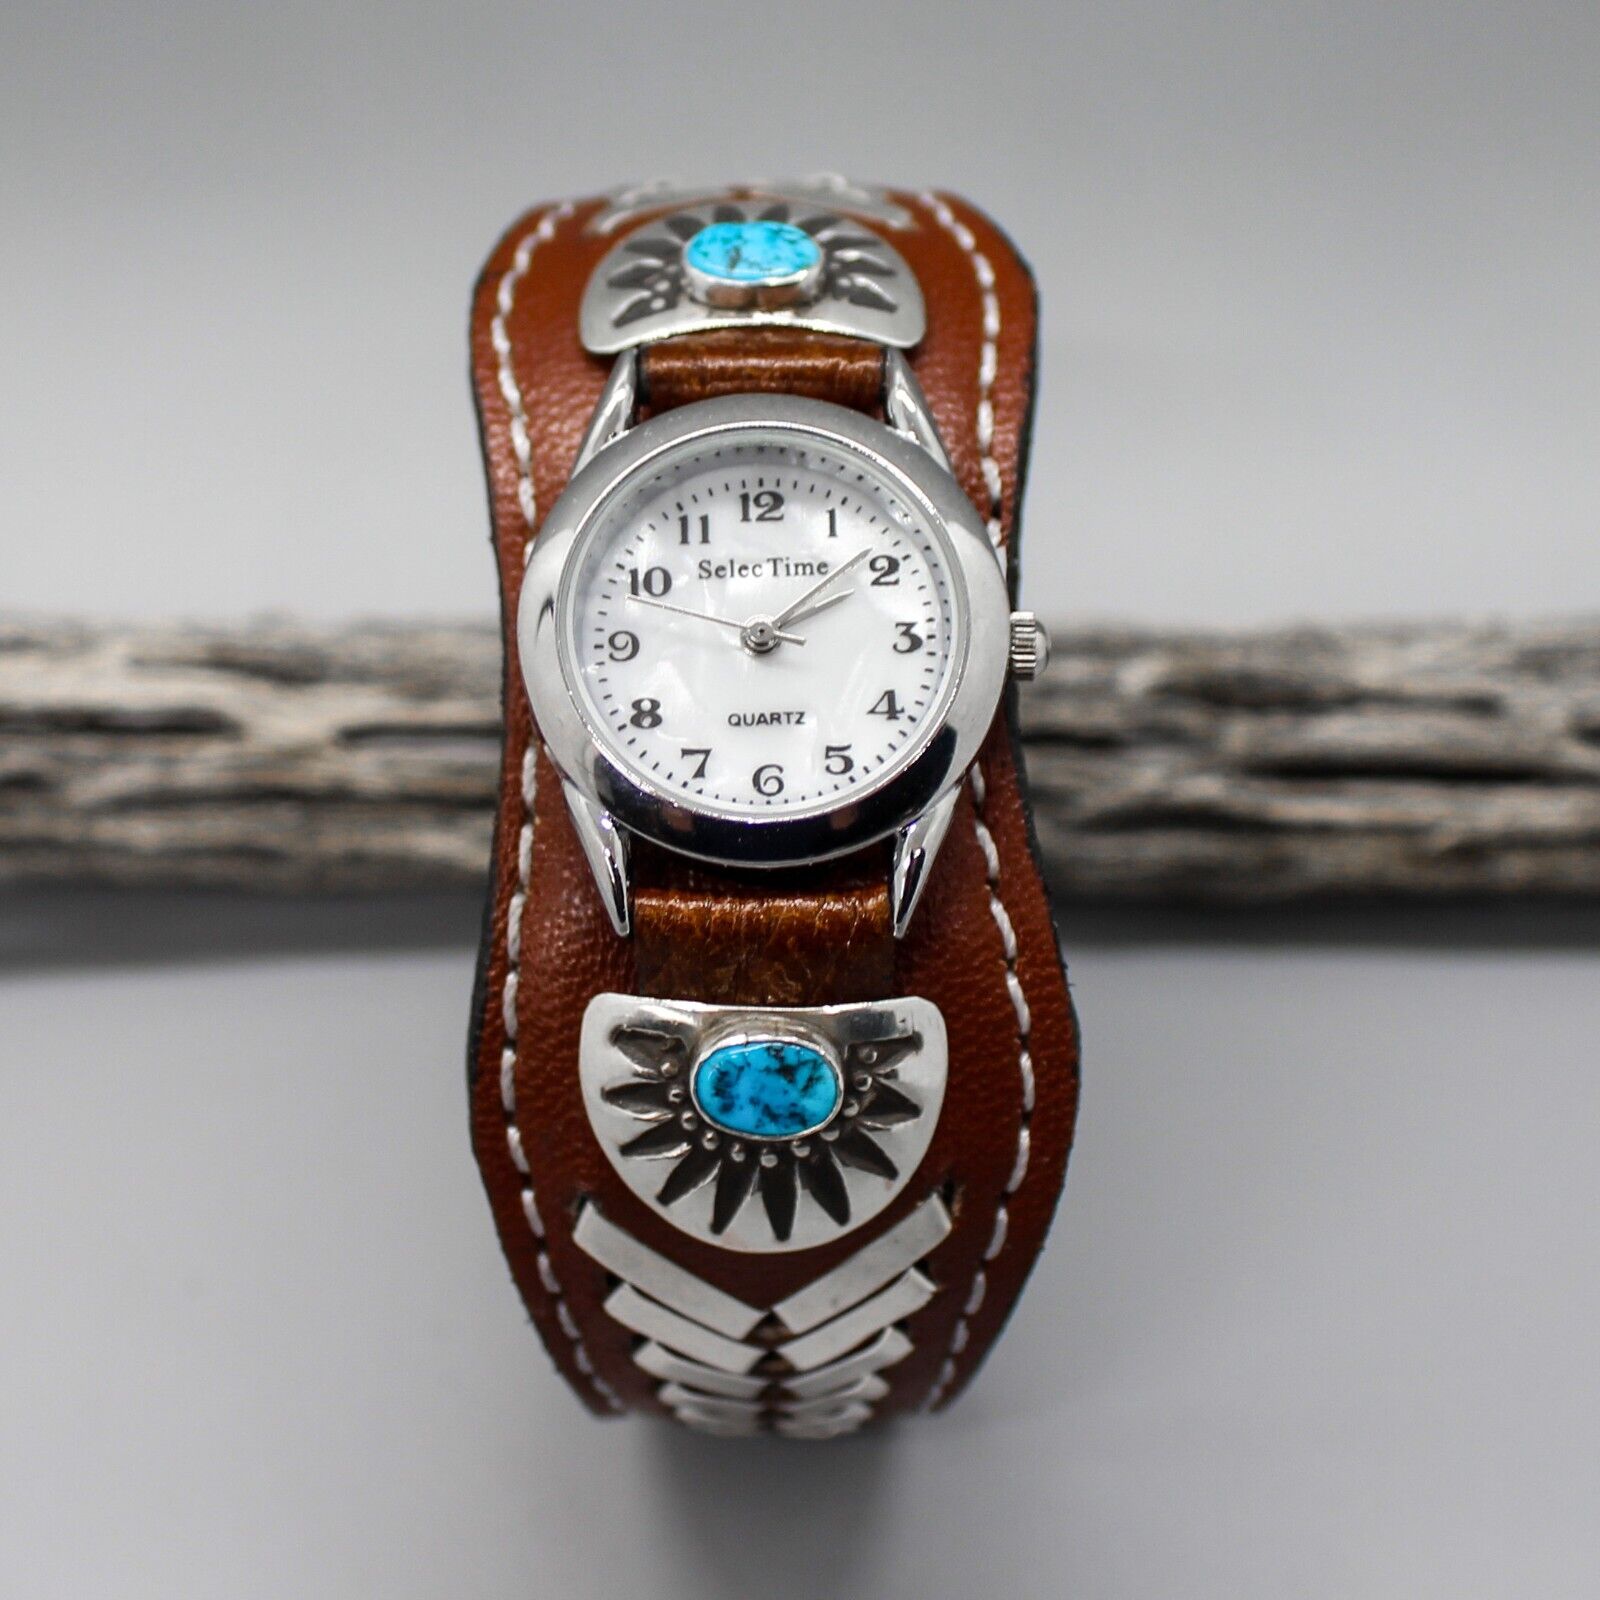 NAVAJO-BROWN LEATHER, TURQUOISE, & STERLING WATCH CUFF  by FRANK ARMSTRONG